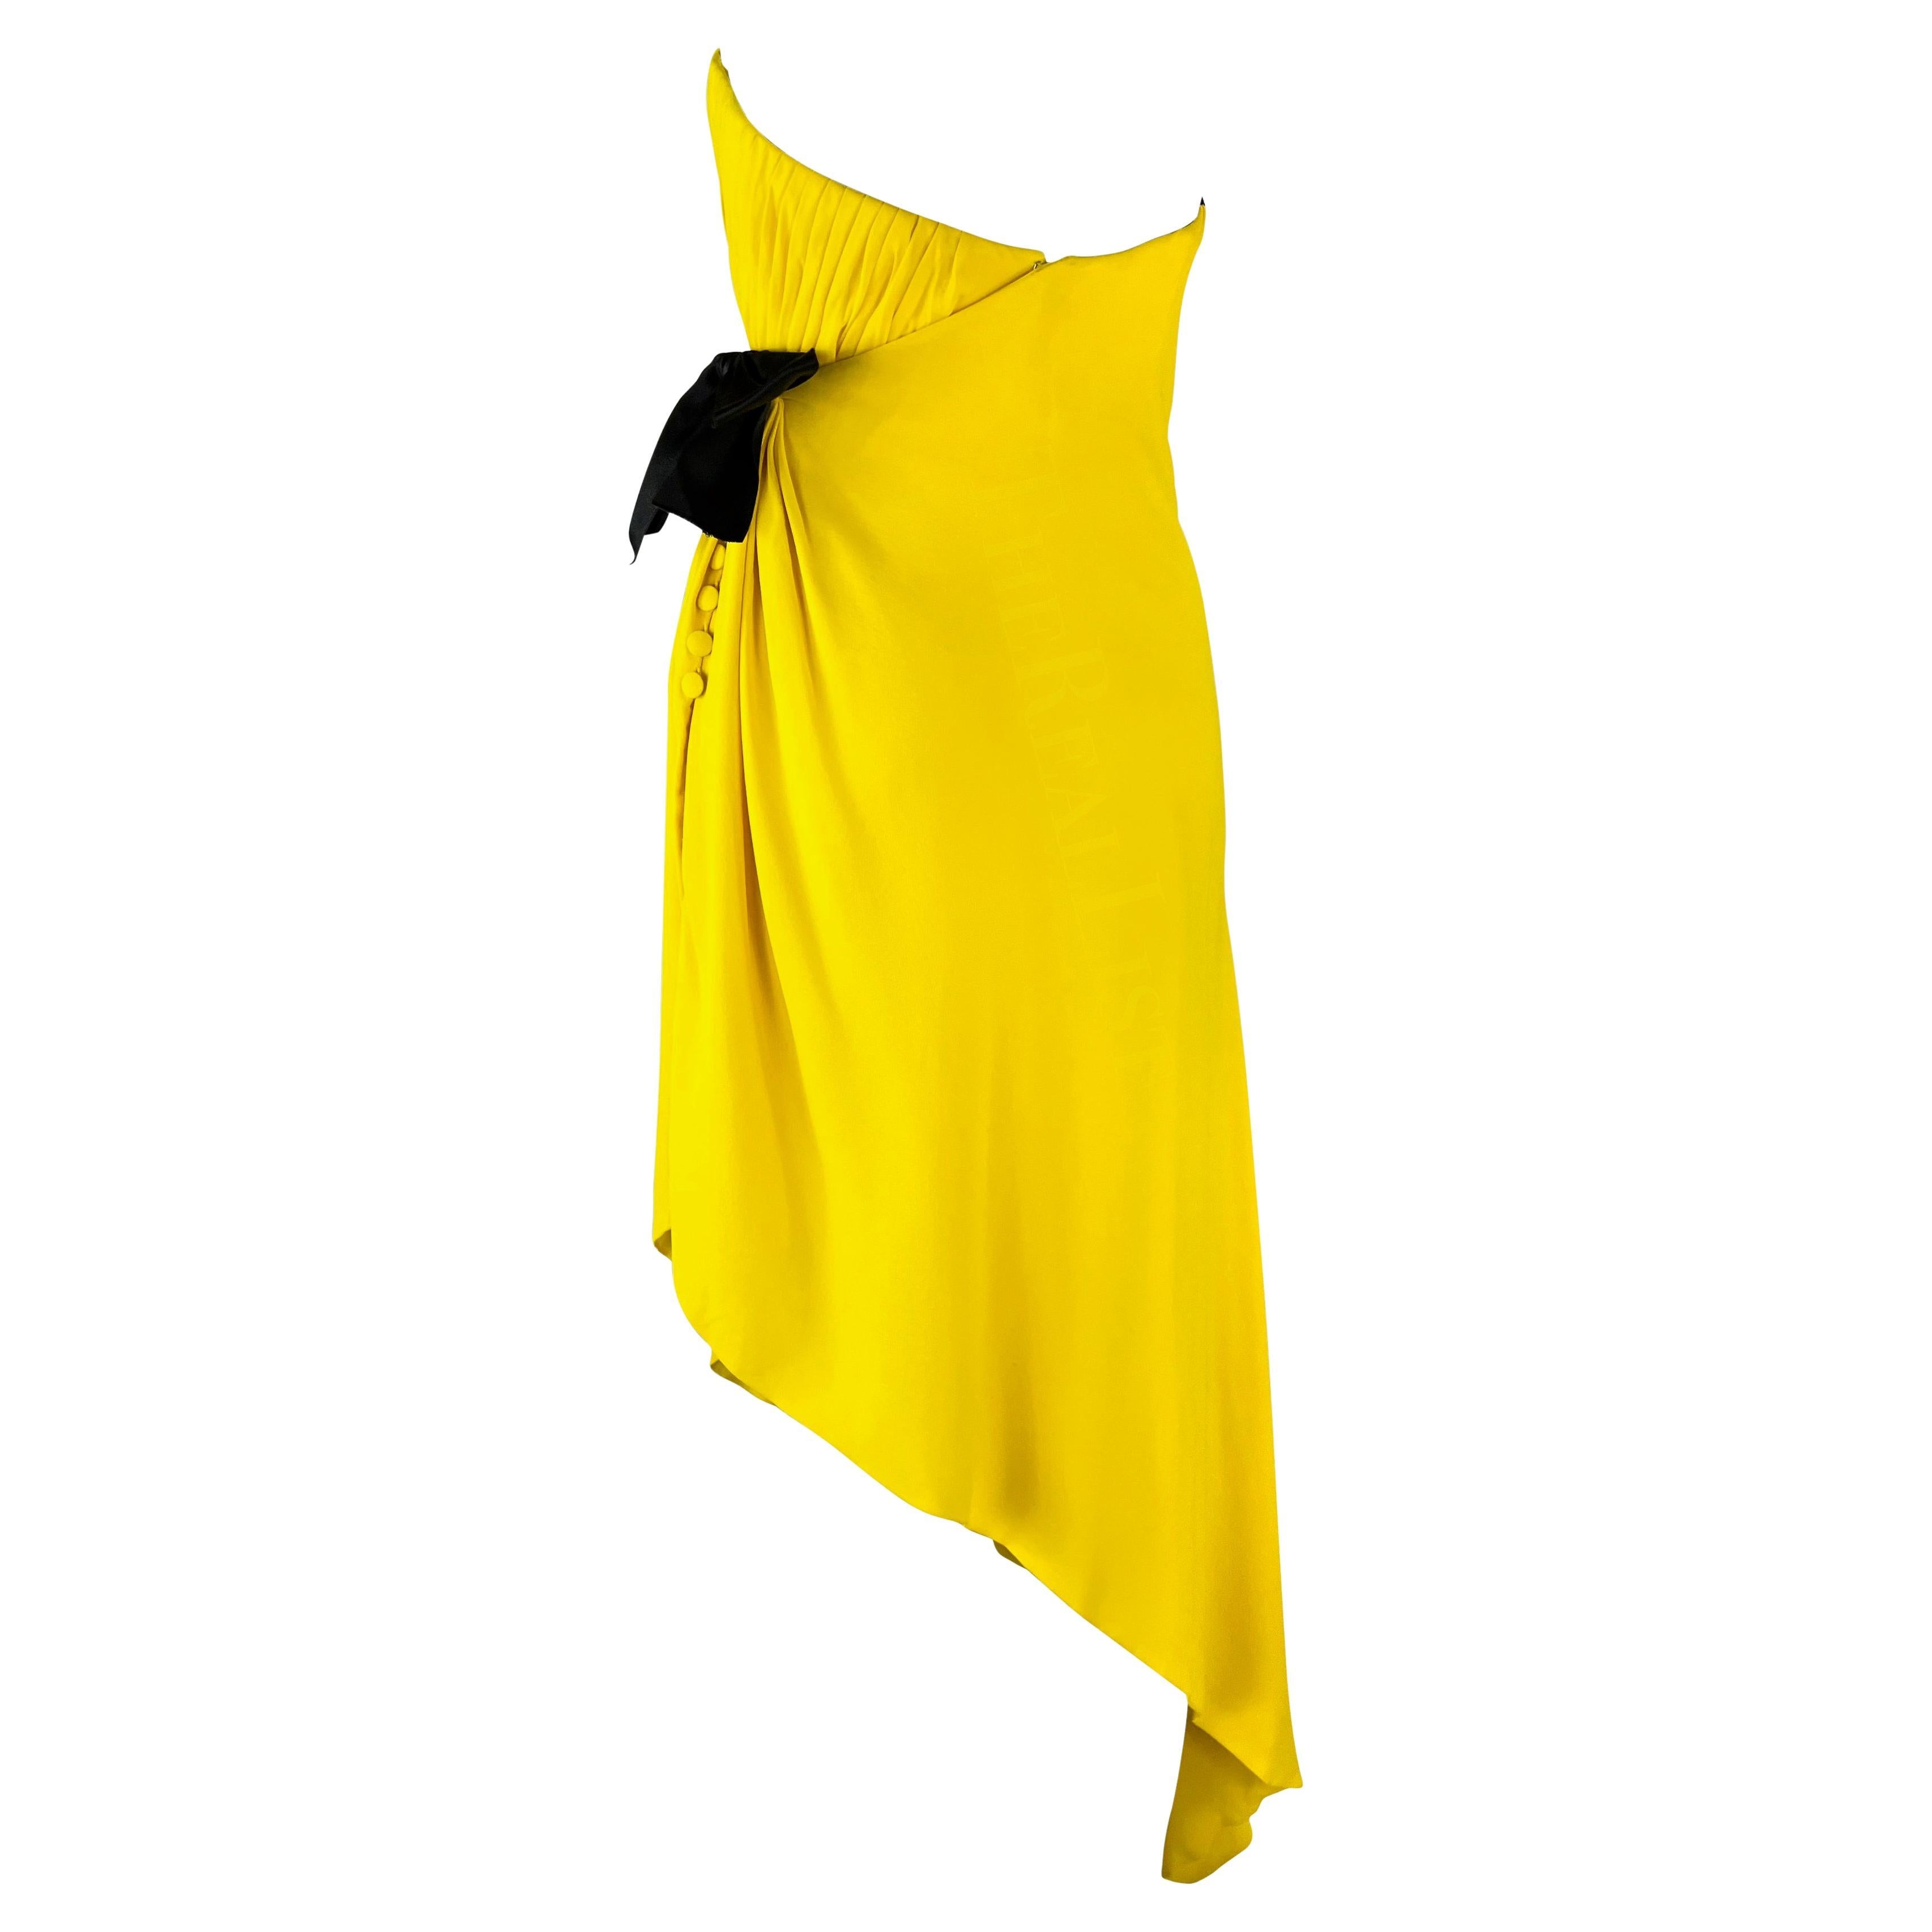 S/S 1991 Chanel by Karl Lagerfeld Runway Ad Yellow Strapless Asymmetric Dress For Sale 3